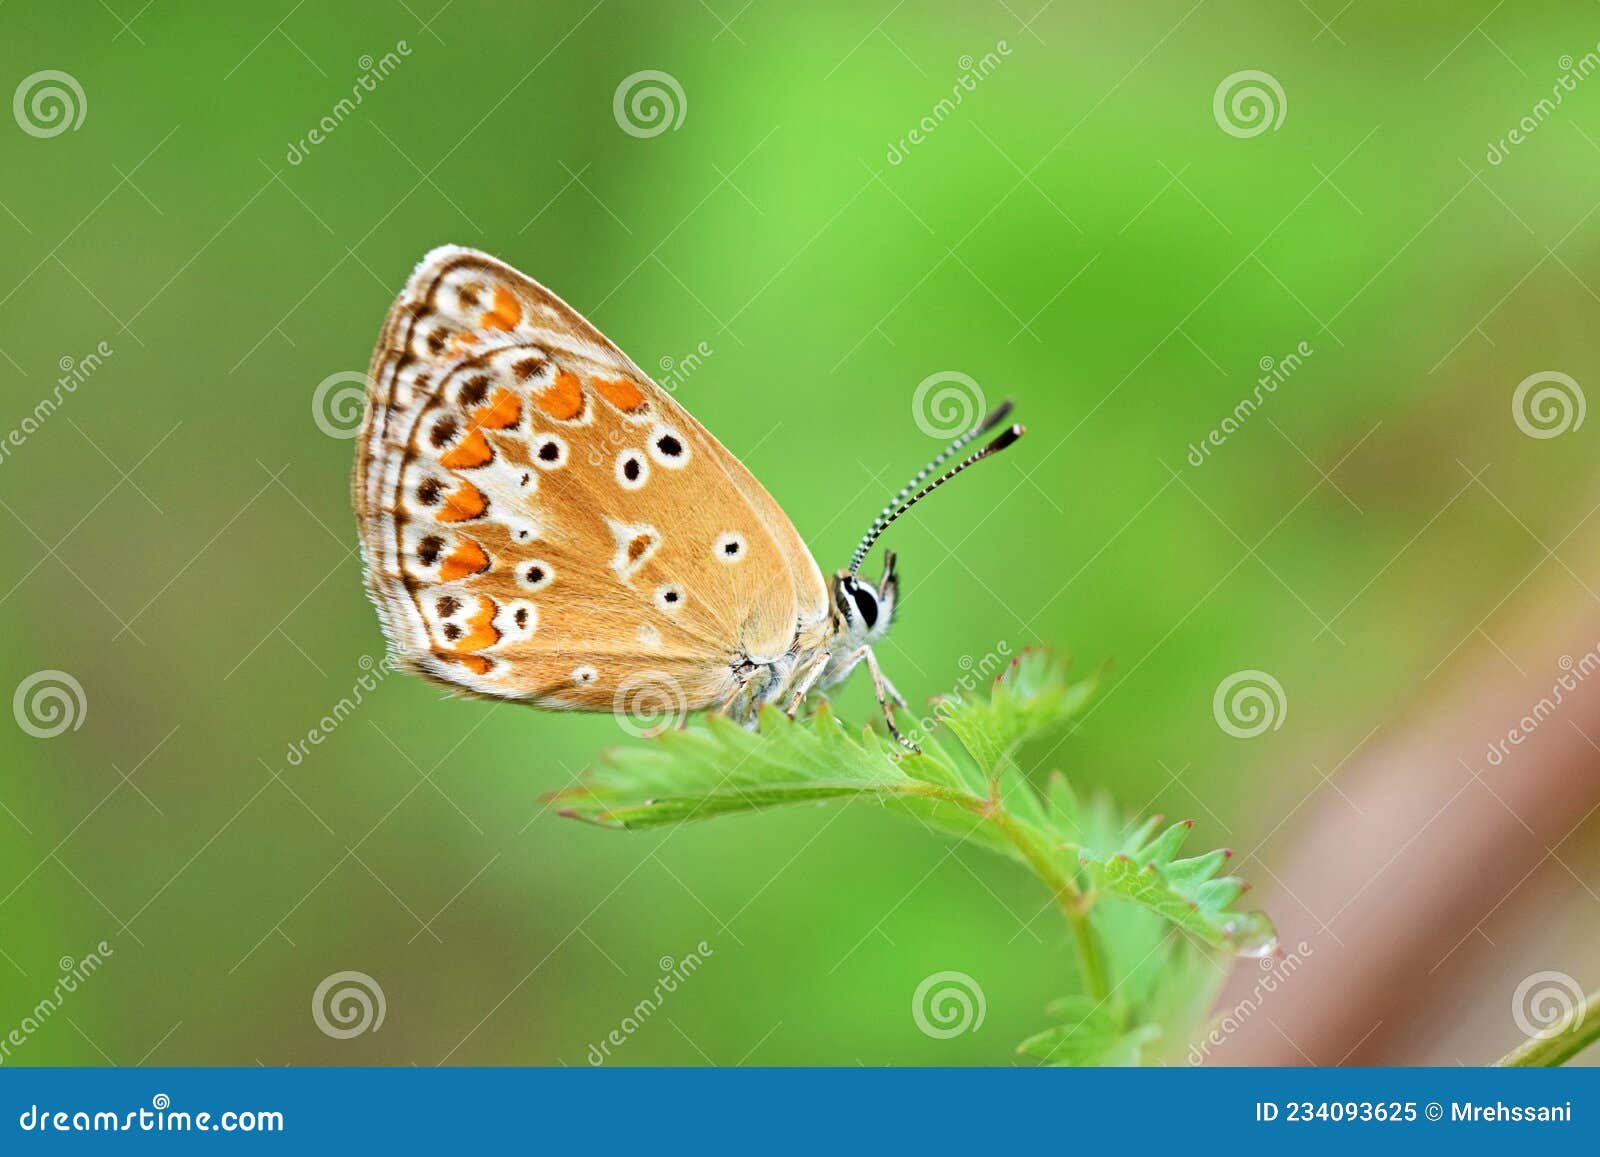 aricia agestis, the brown argus butterfly , butterflies of iran